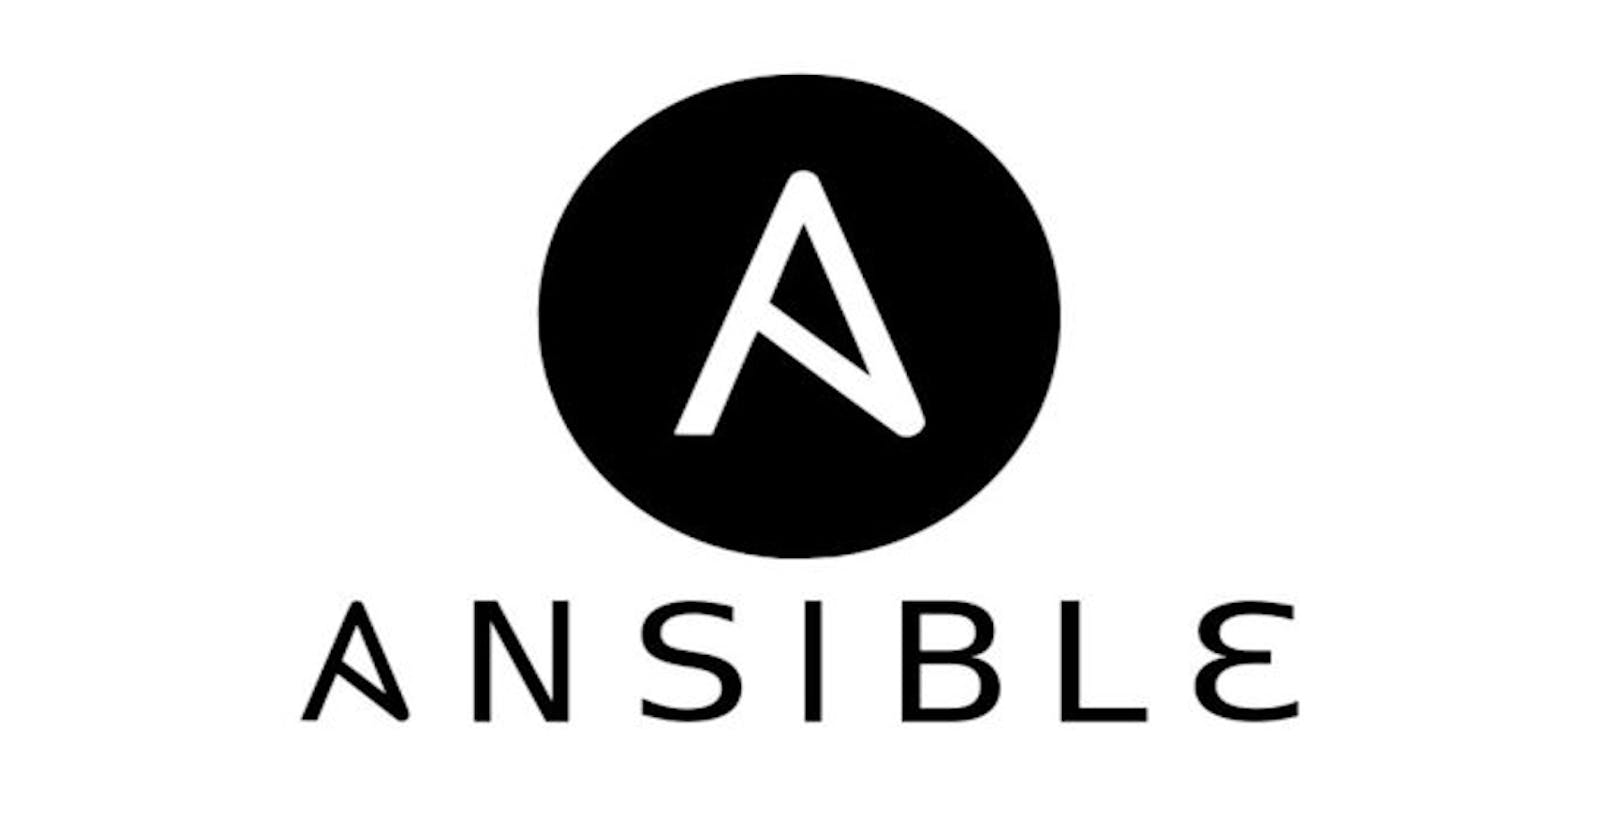 Hands-on with Configuration Management with multiple AWS EC2 instances "ft. Ansible"...